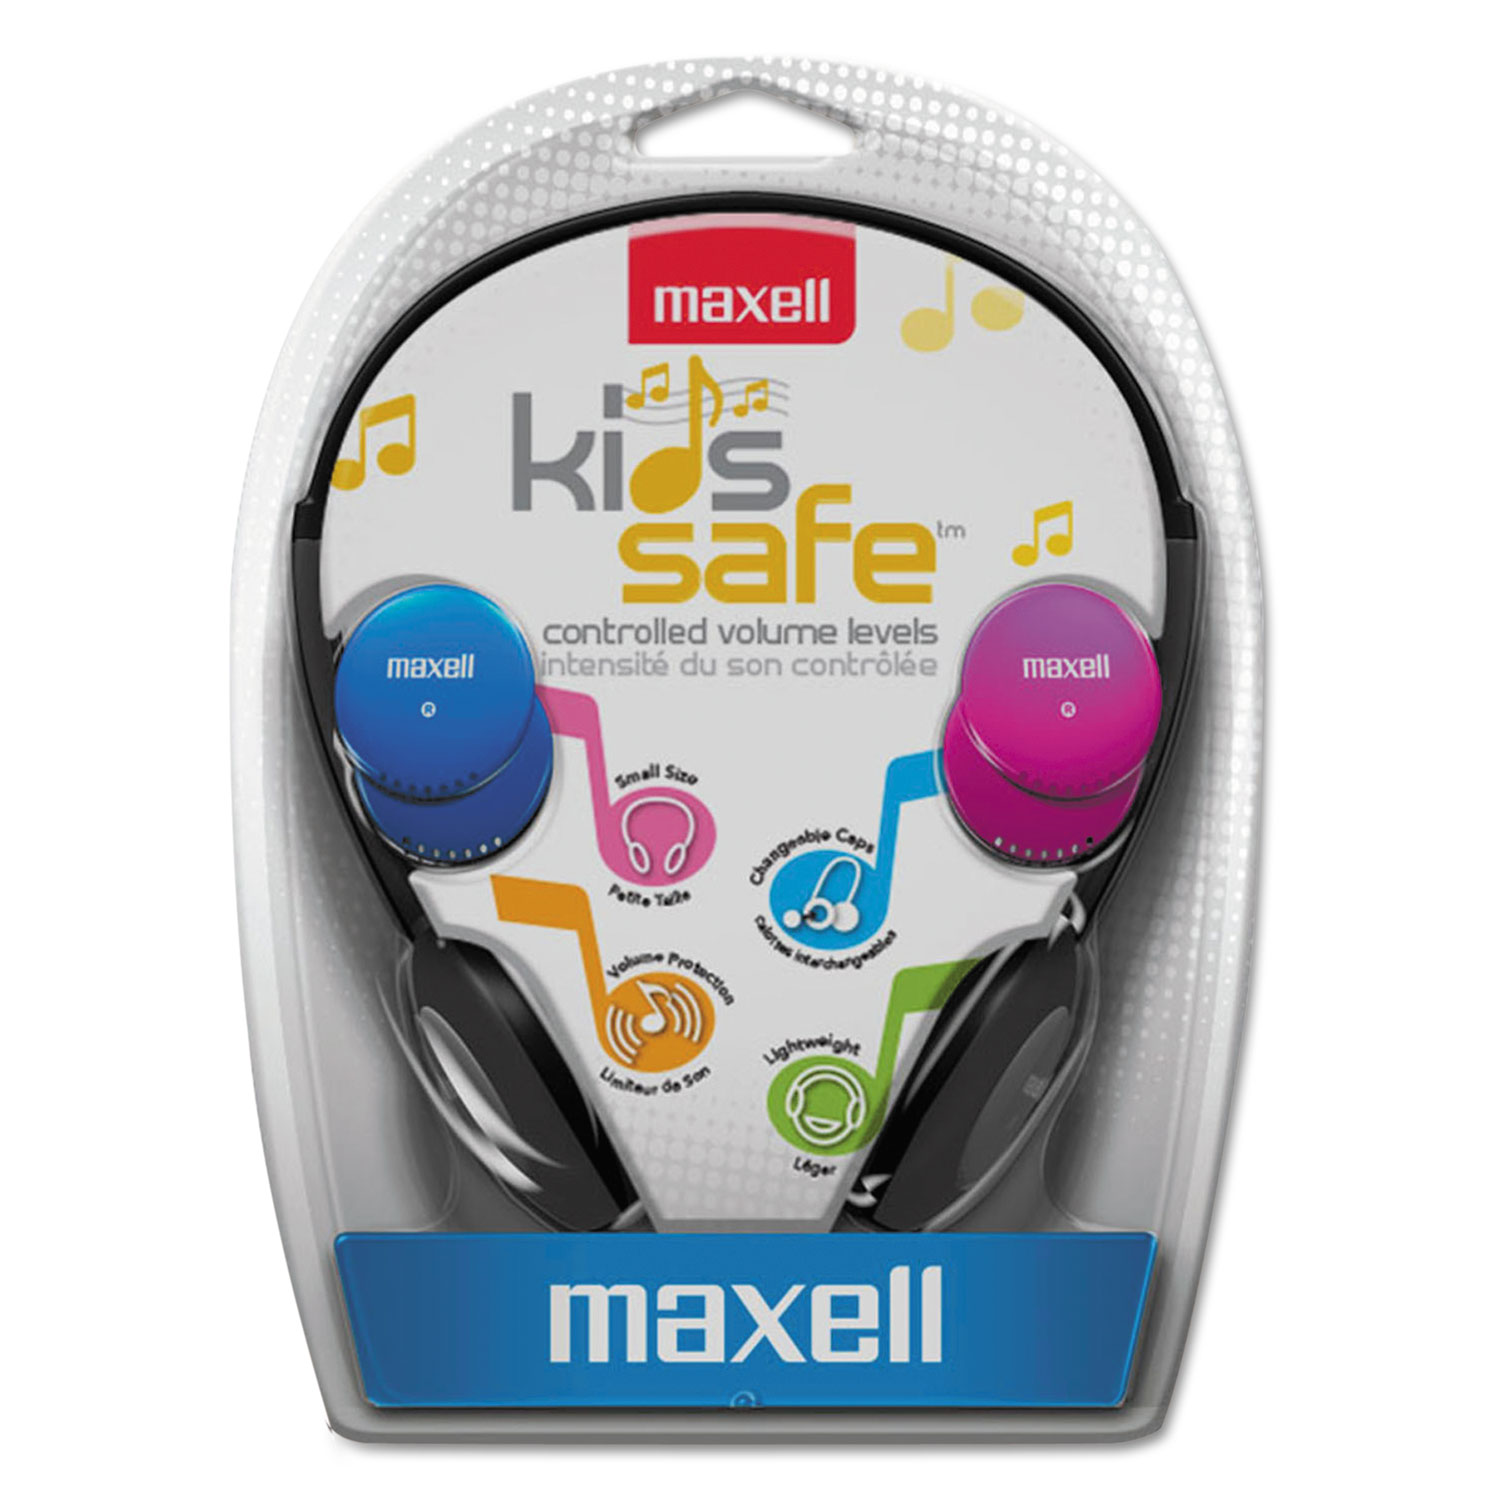  Maxell 190338 Kids Safe Headphones, Pink/Blue/Silver (MAX190338) 